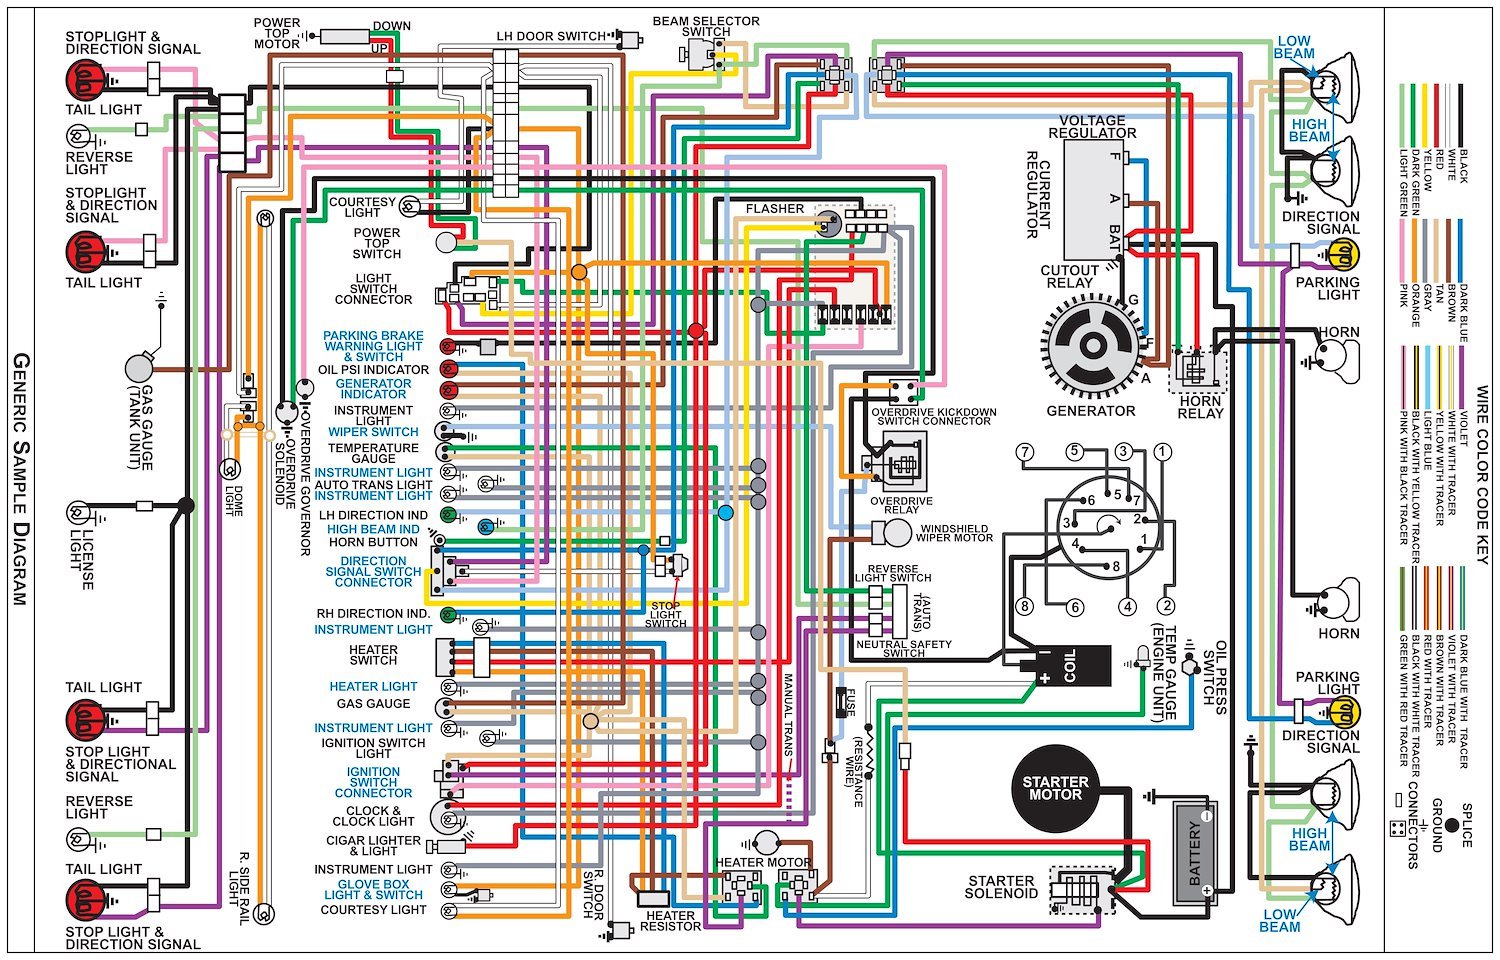 Wiring Diagram for 1973 Ford Mustang, 11 in x 17 in., Laminated